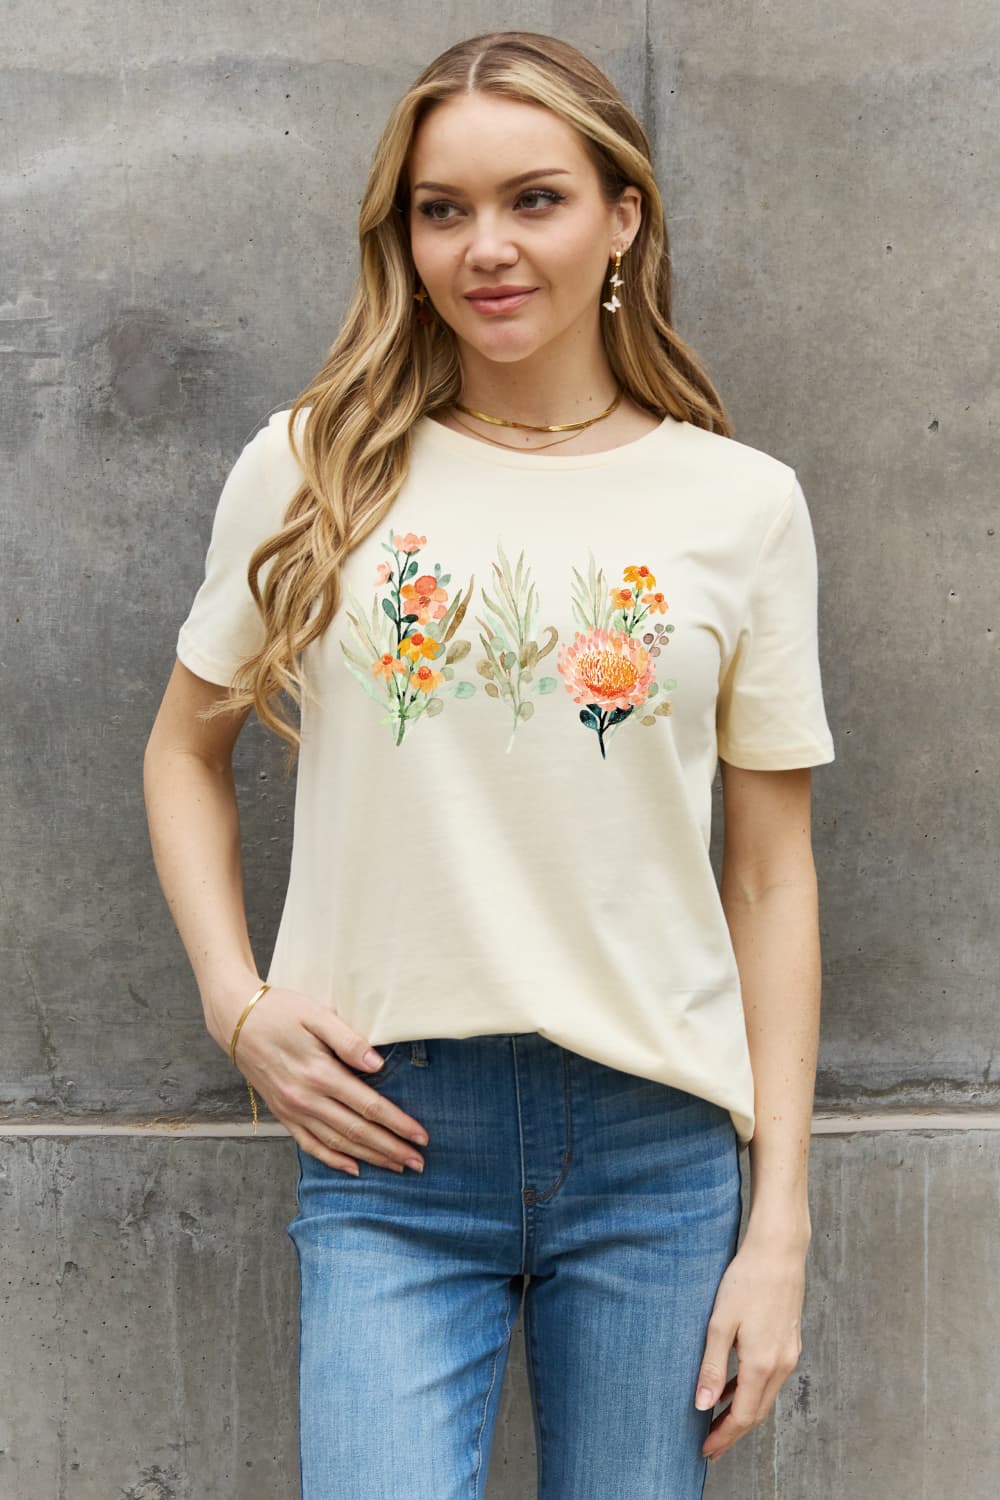 Light Slate Gray Simply Love Flower Graphic Round Neck Cotton Tee Sentient Beauty Fashions Apparel & Accessories